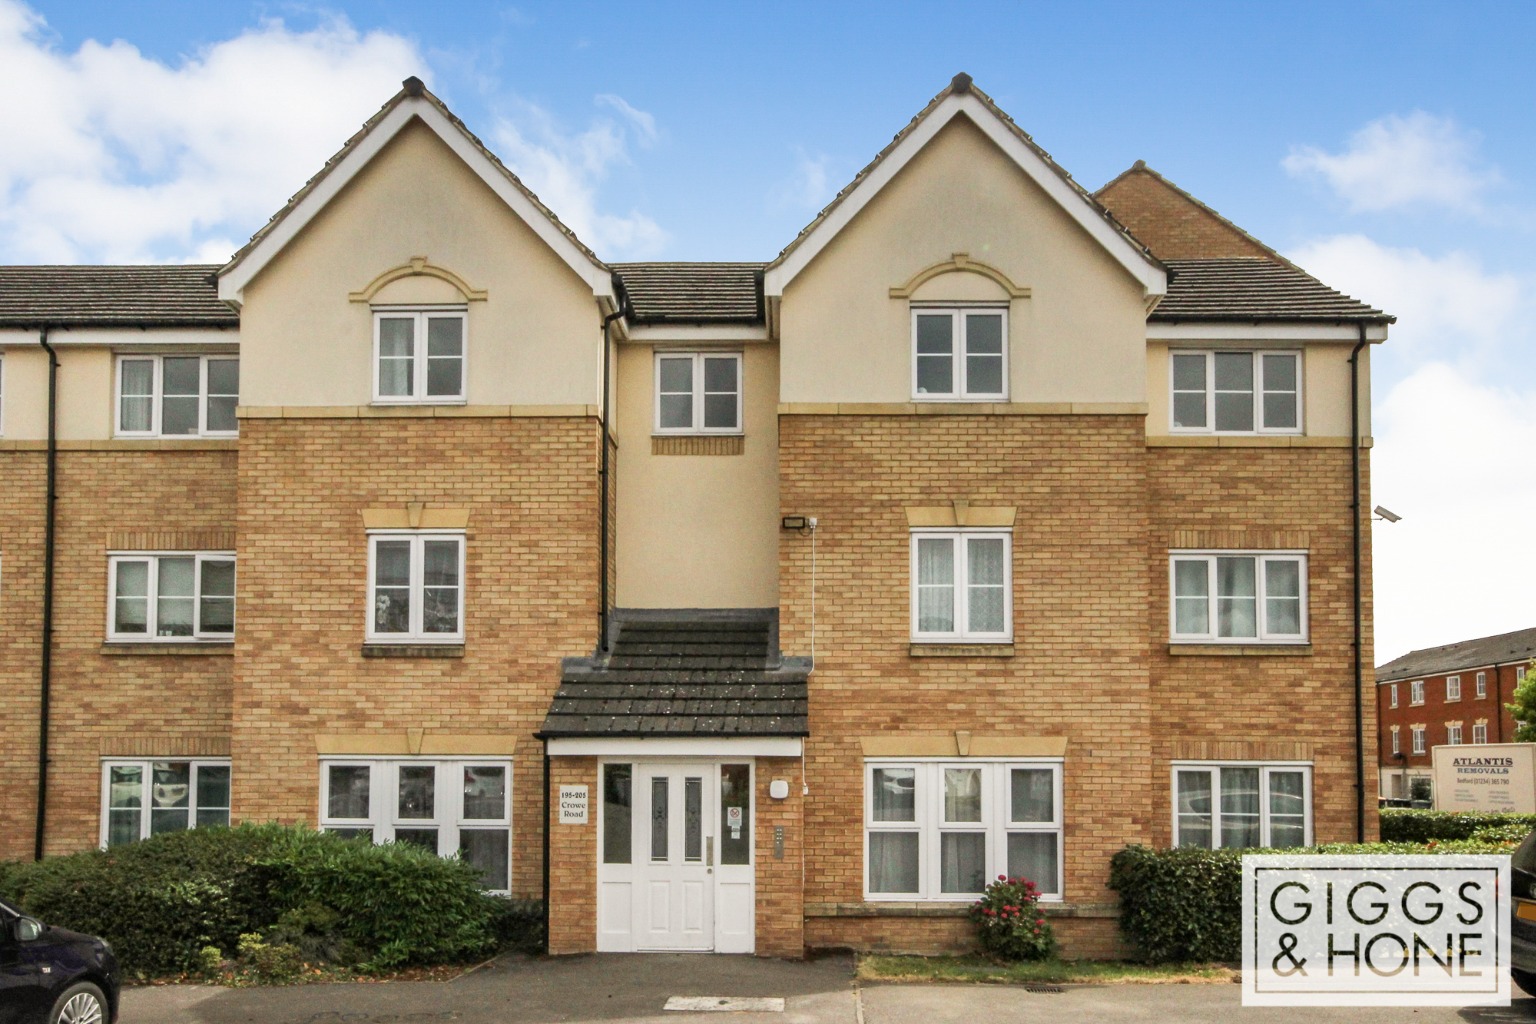 1 bed flat for sale in Crowe Road, Bedford - Property Image 1